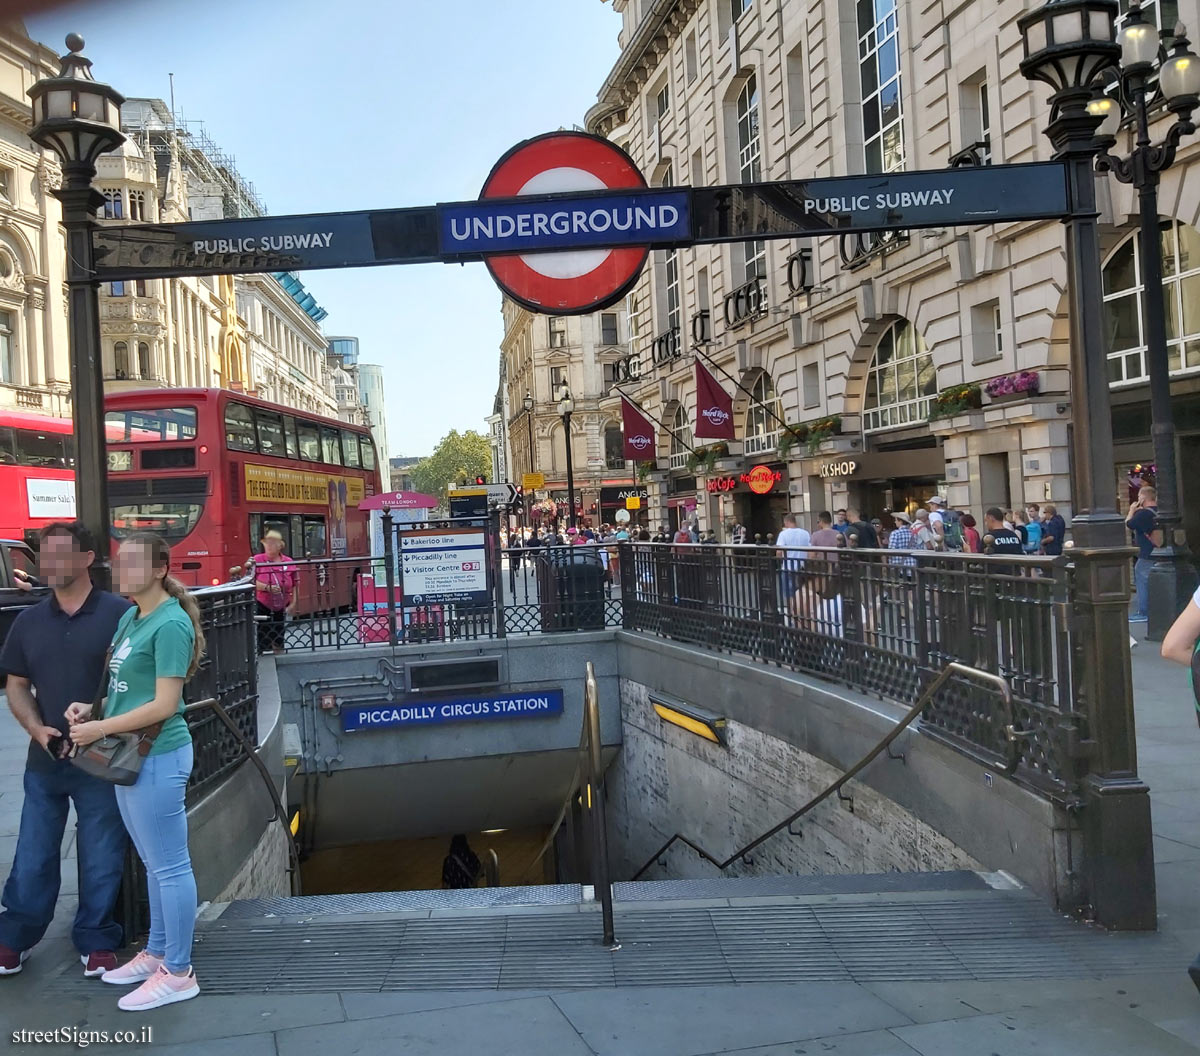 London Underground - Entrance to Piccadilly Circus Station